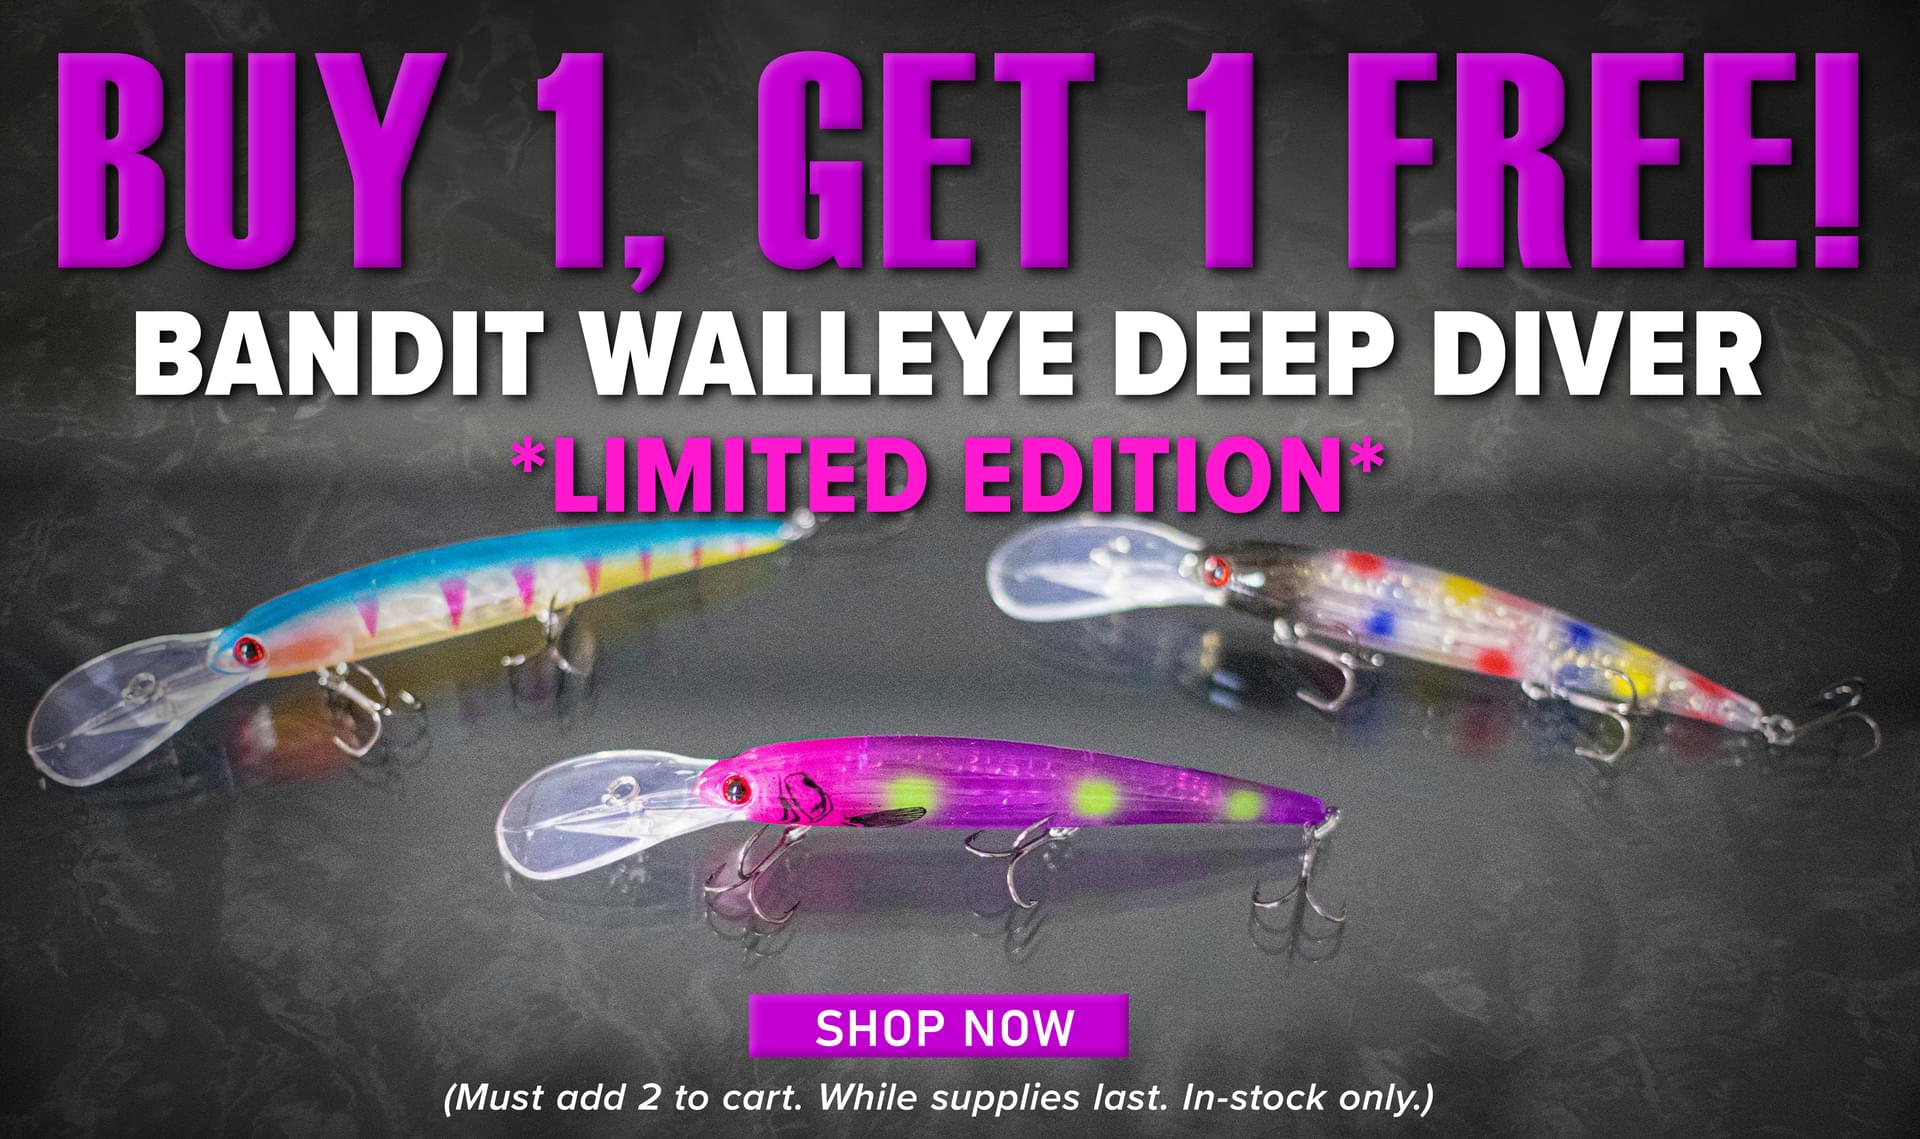 Buy 1, Get 1 Free Bandit Walleye Deep Diver Limited Editions